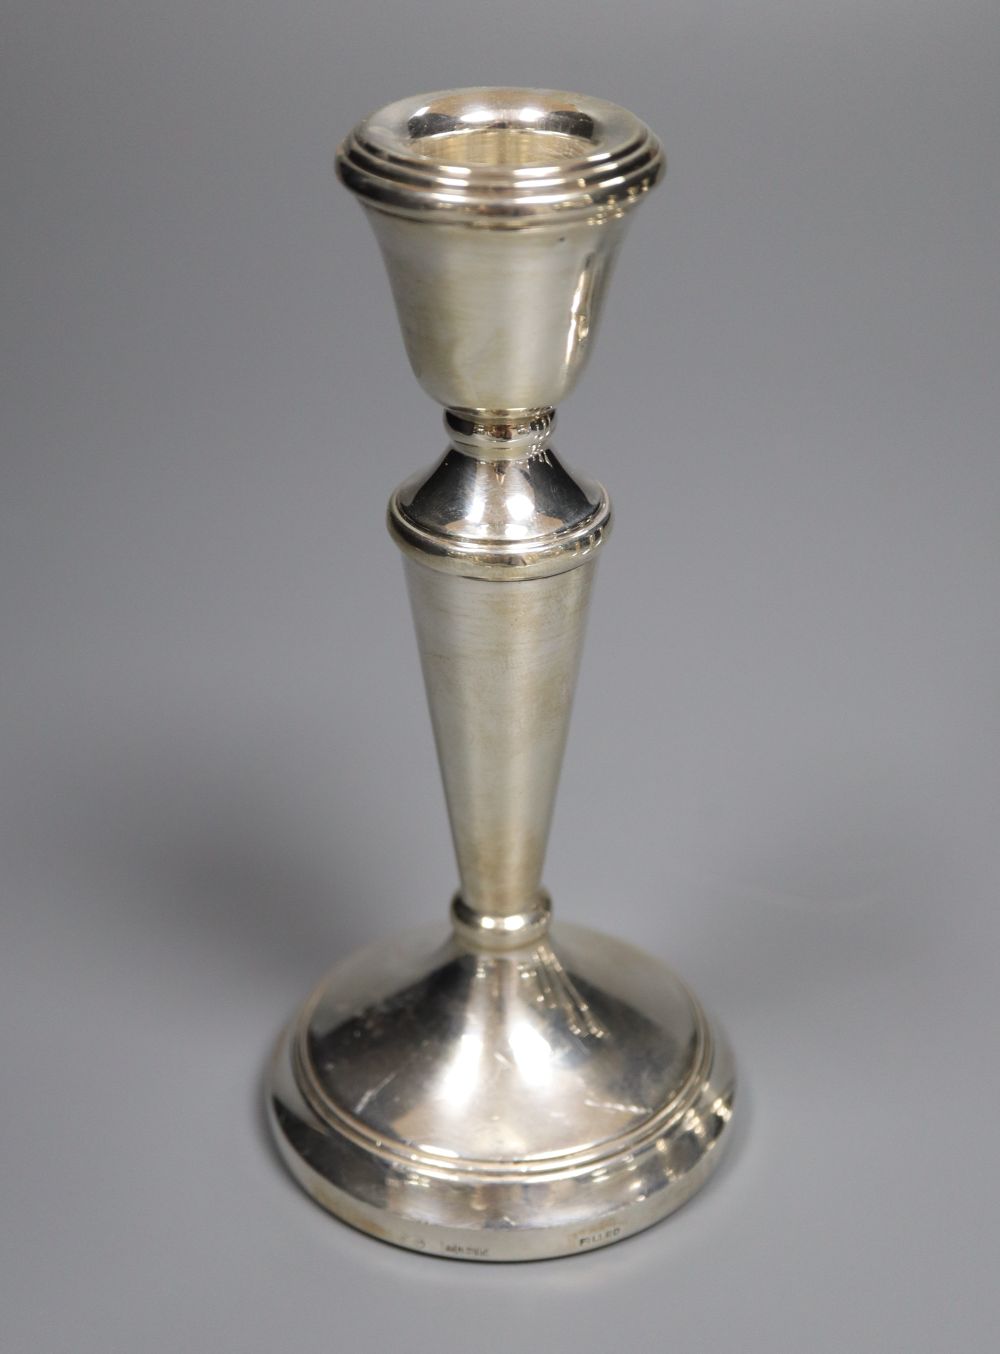 Two pairs of modern silver candlesticks, C. Ltd, Birmingham, 1985 and JM, Birmingham, 1989, 14.5cm, all weighted.